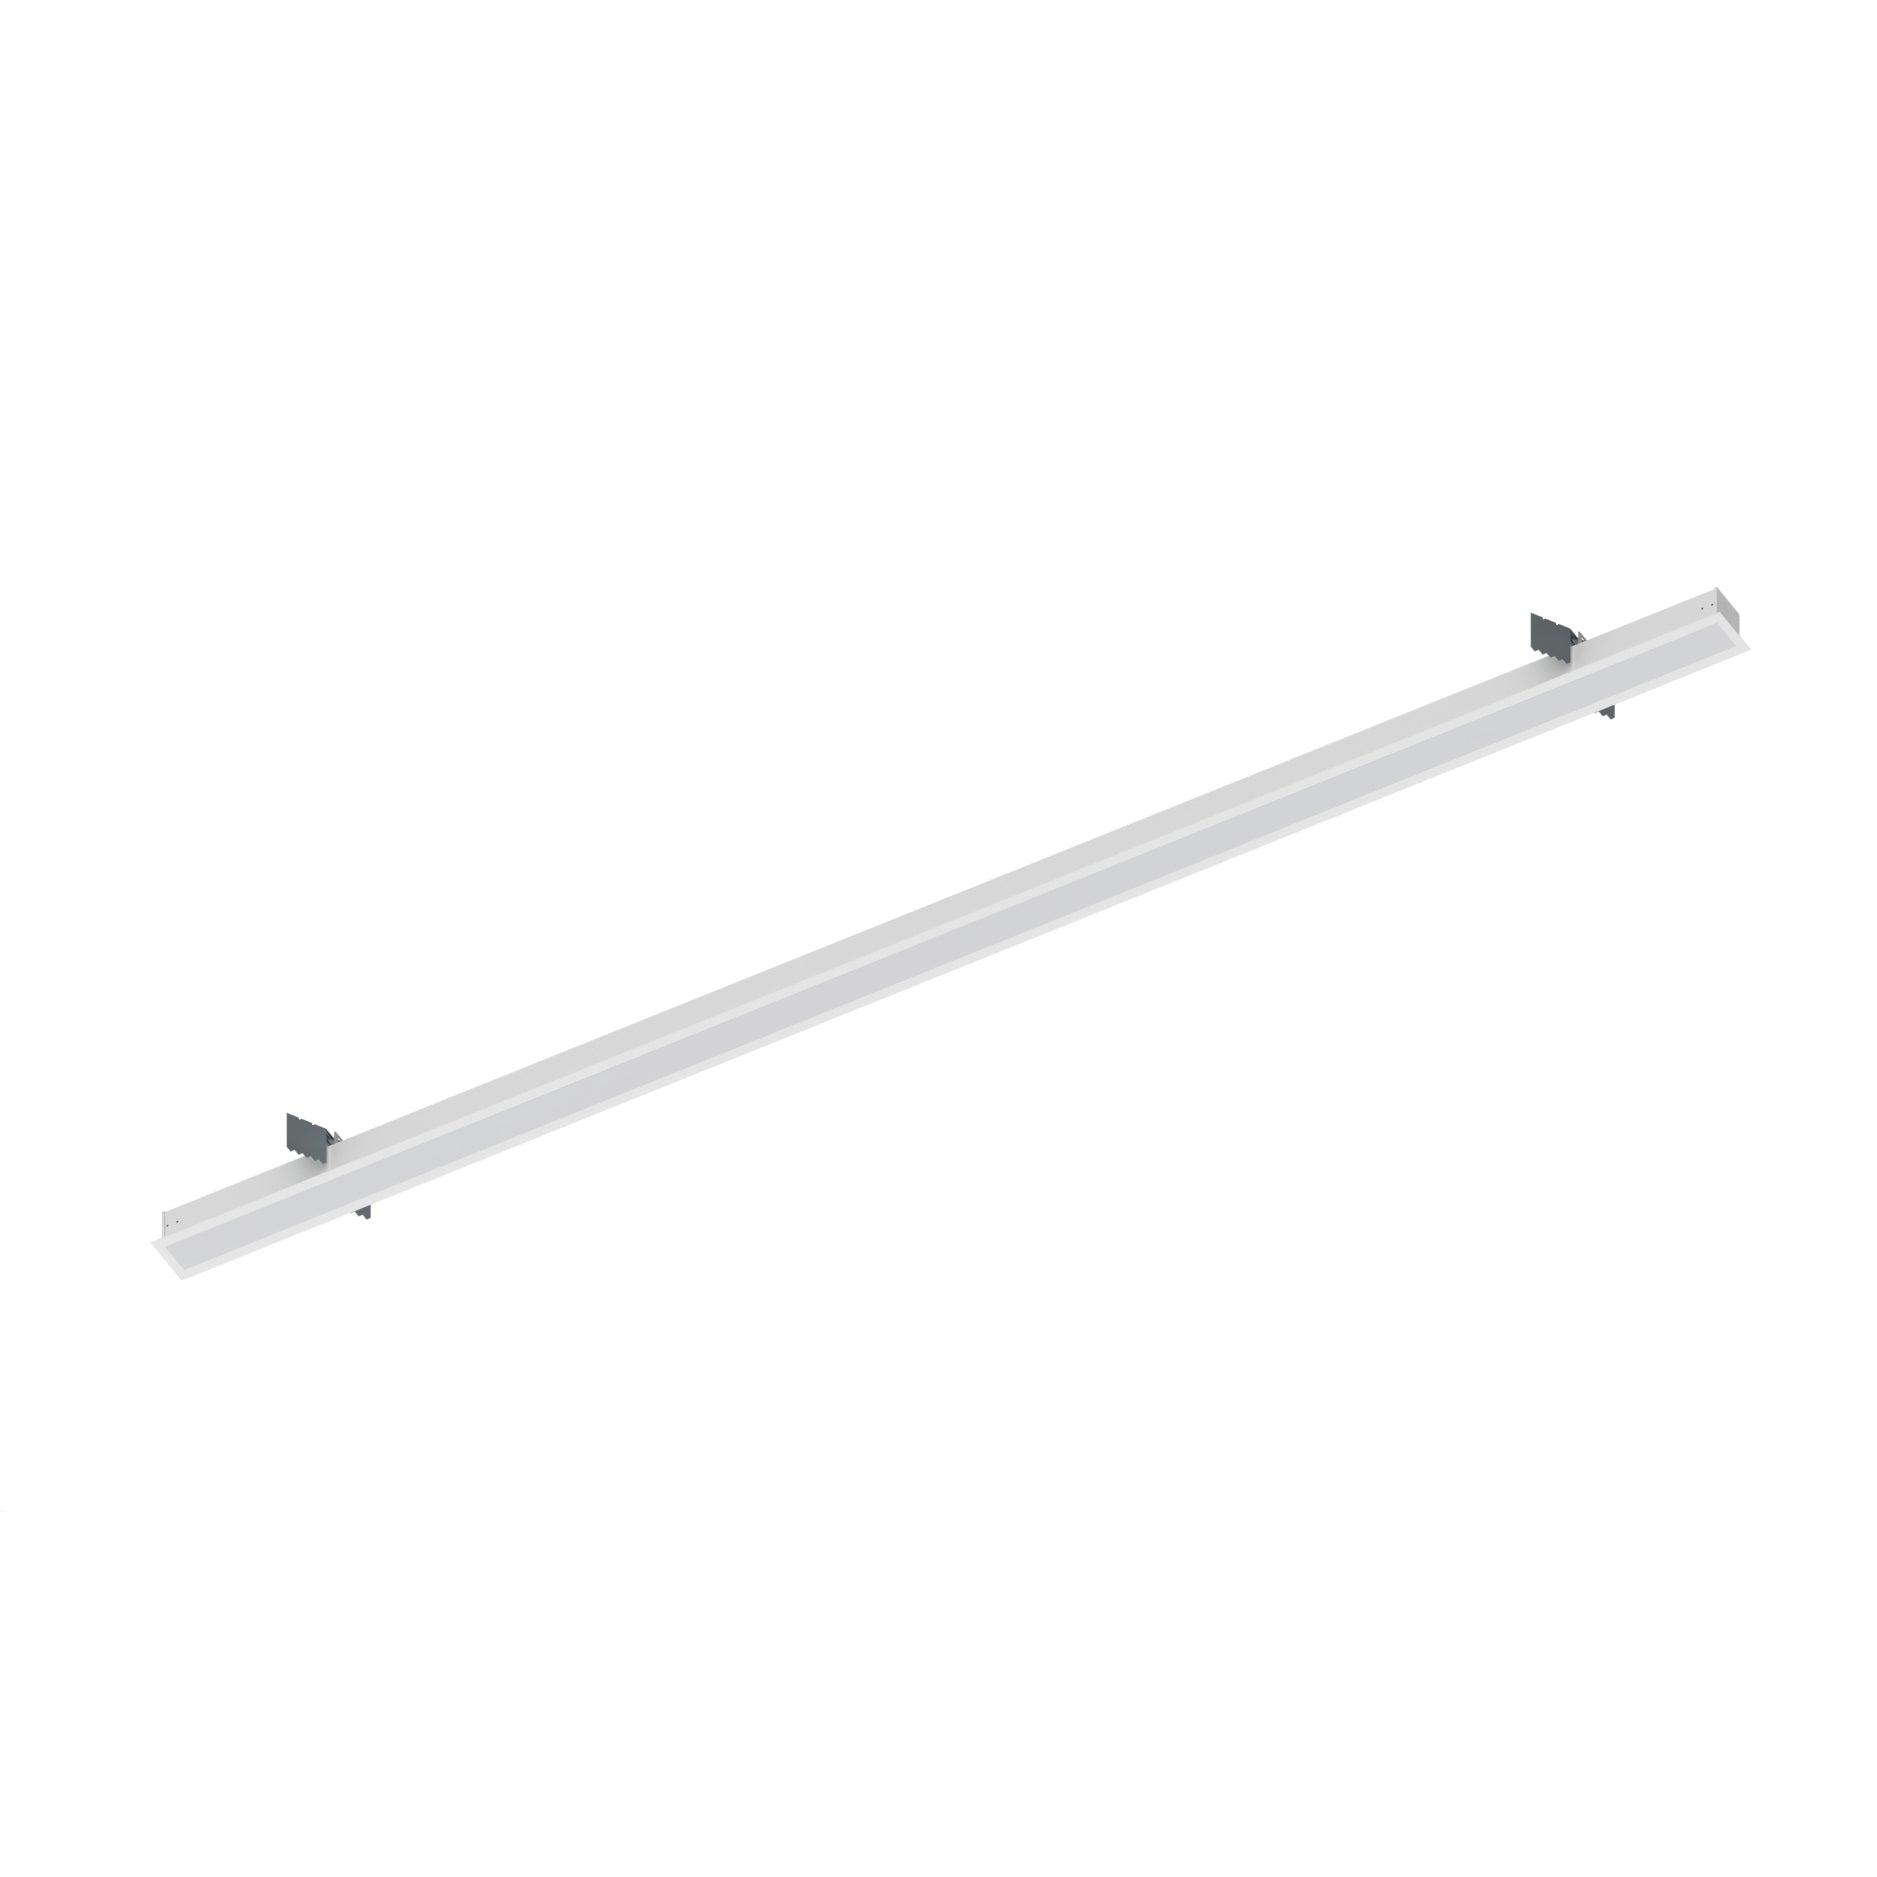 Nora Lighting NRLIN-81040W - Linear - 8' L-Line LED Recessed Linear, 8400lm / 4000K, White Finish